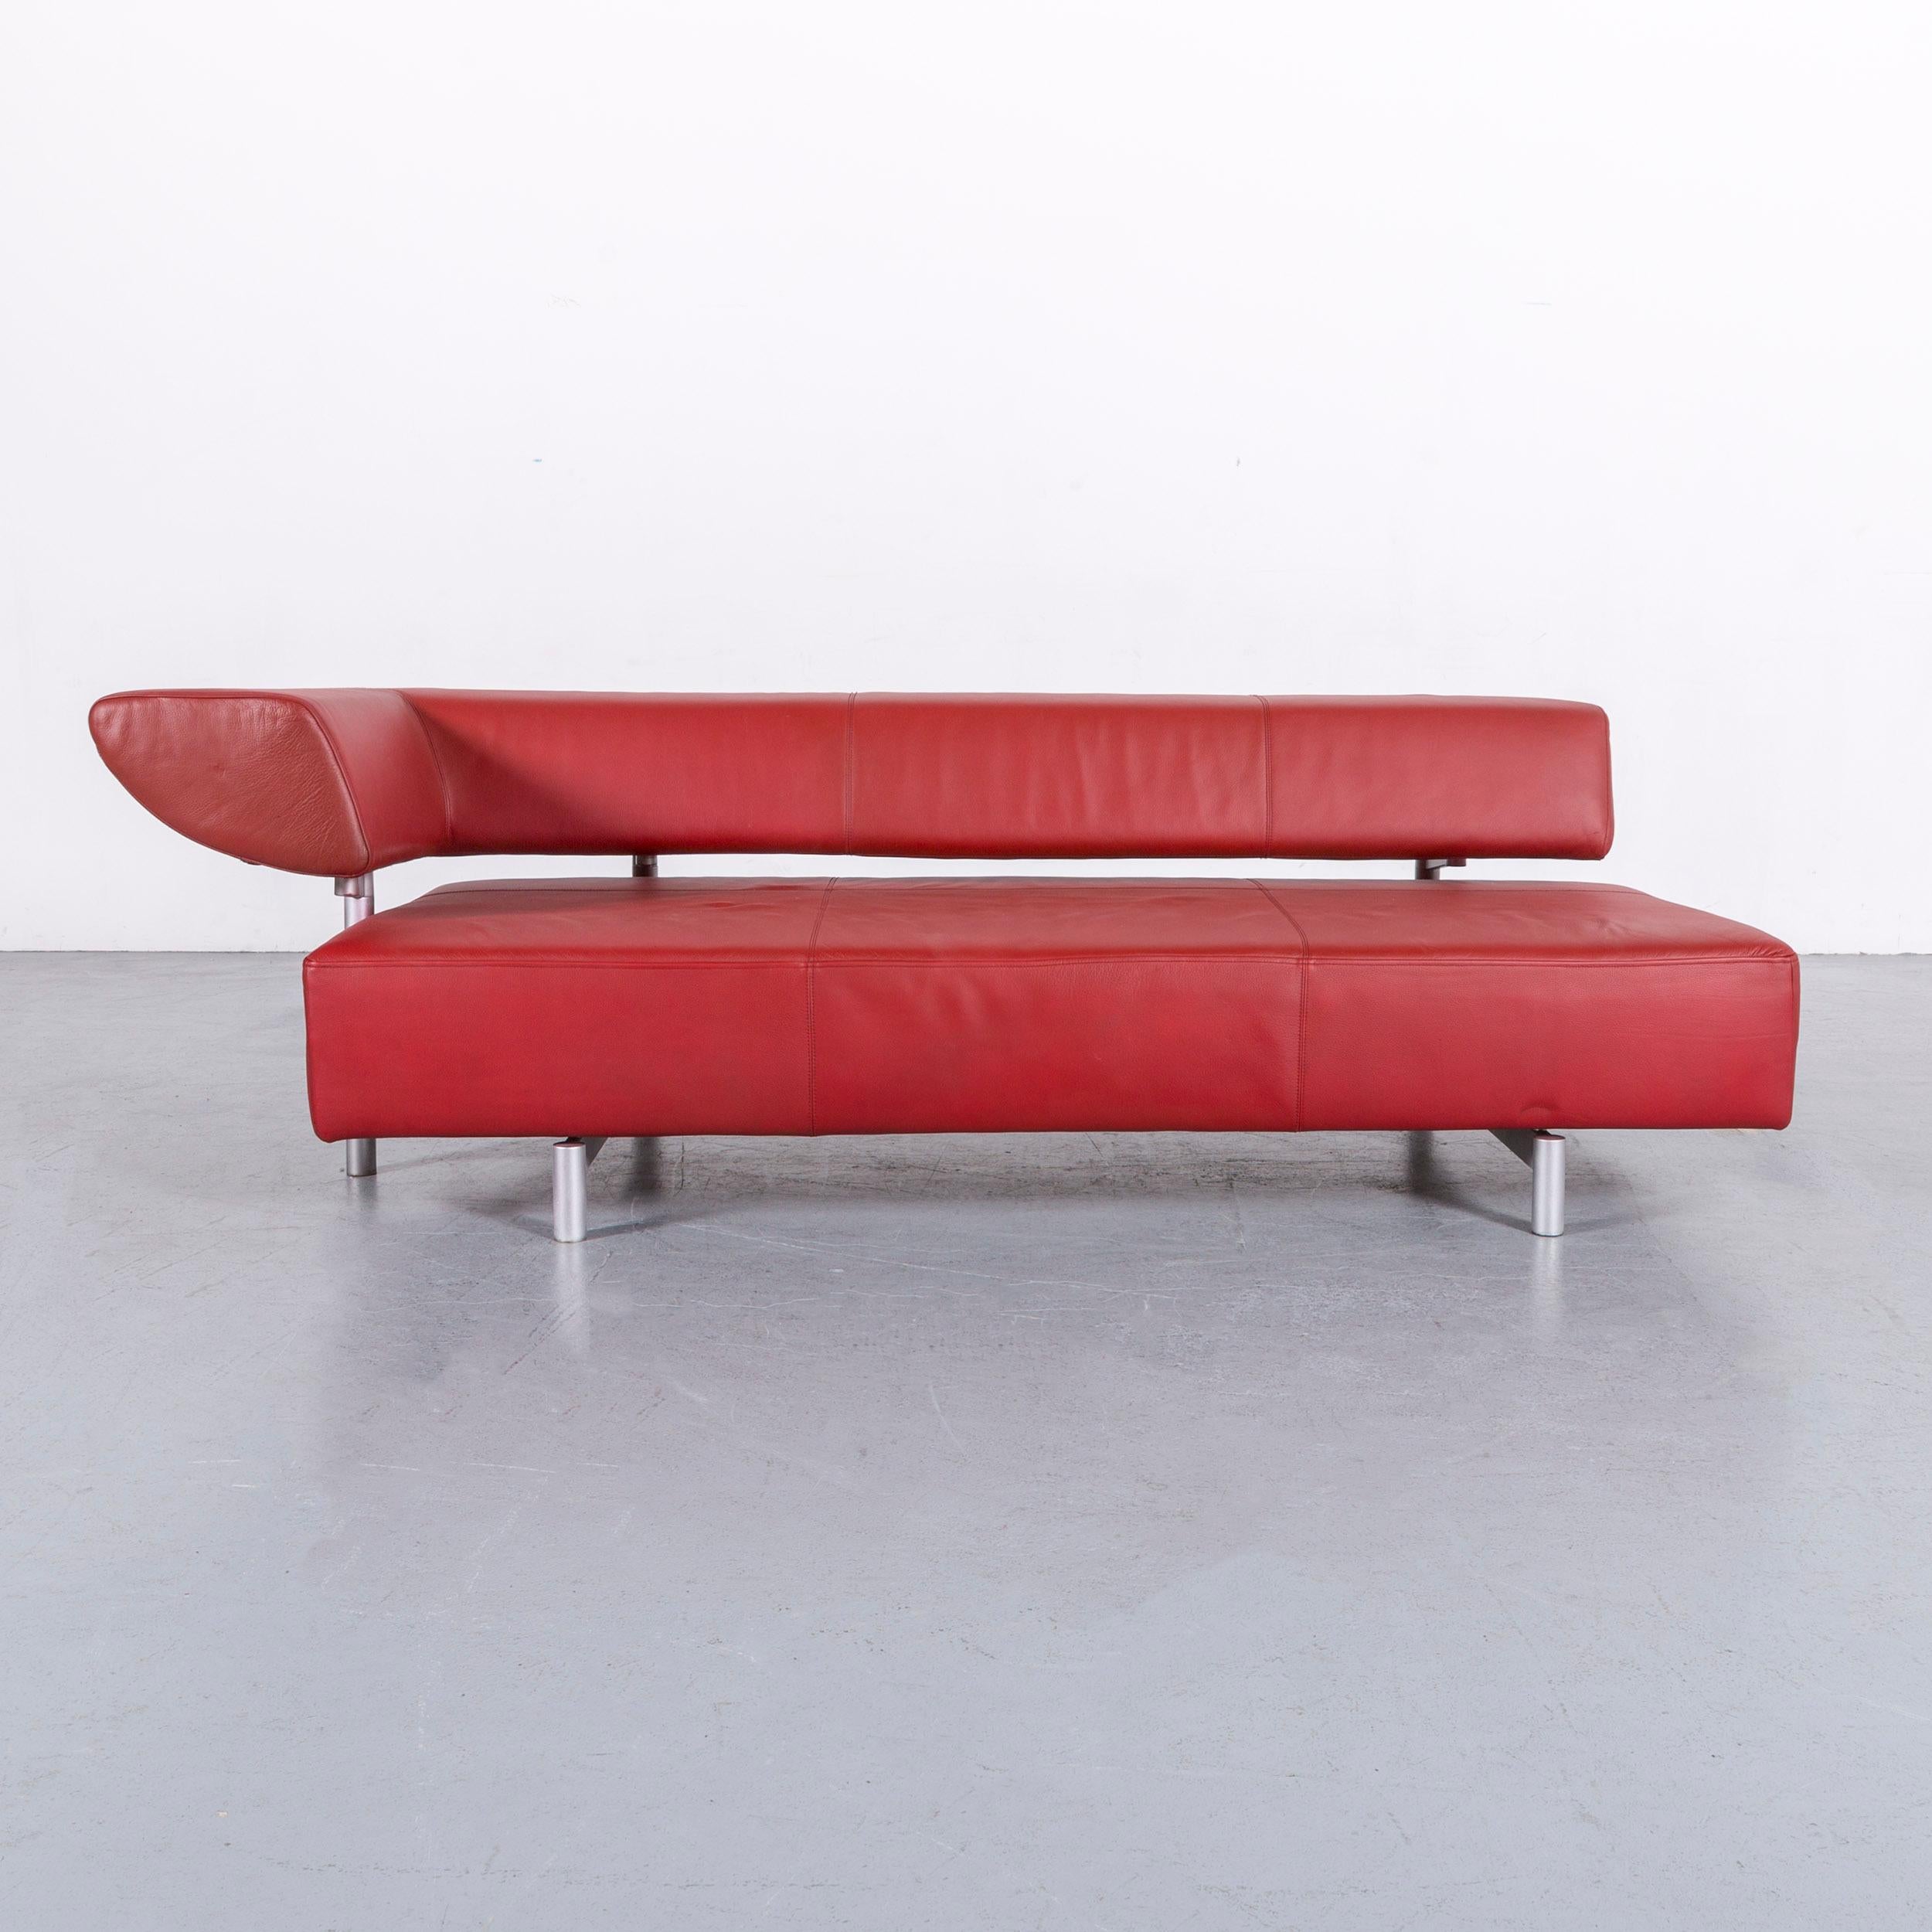 We bring to you an COR Arthe designer leather sofa red three-seat couch.